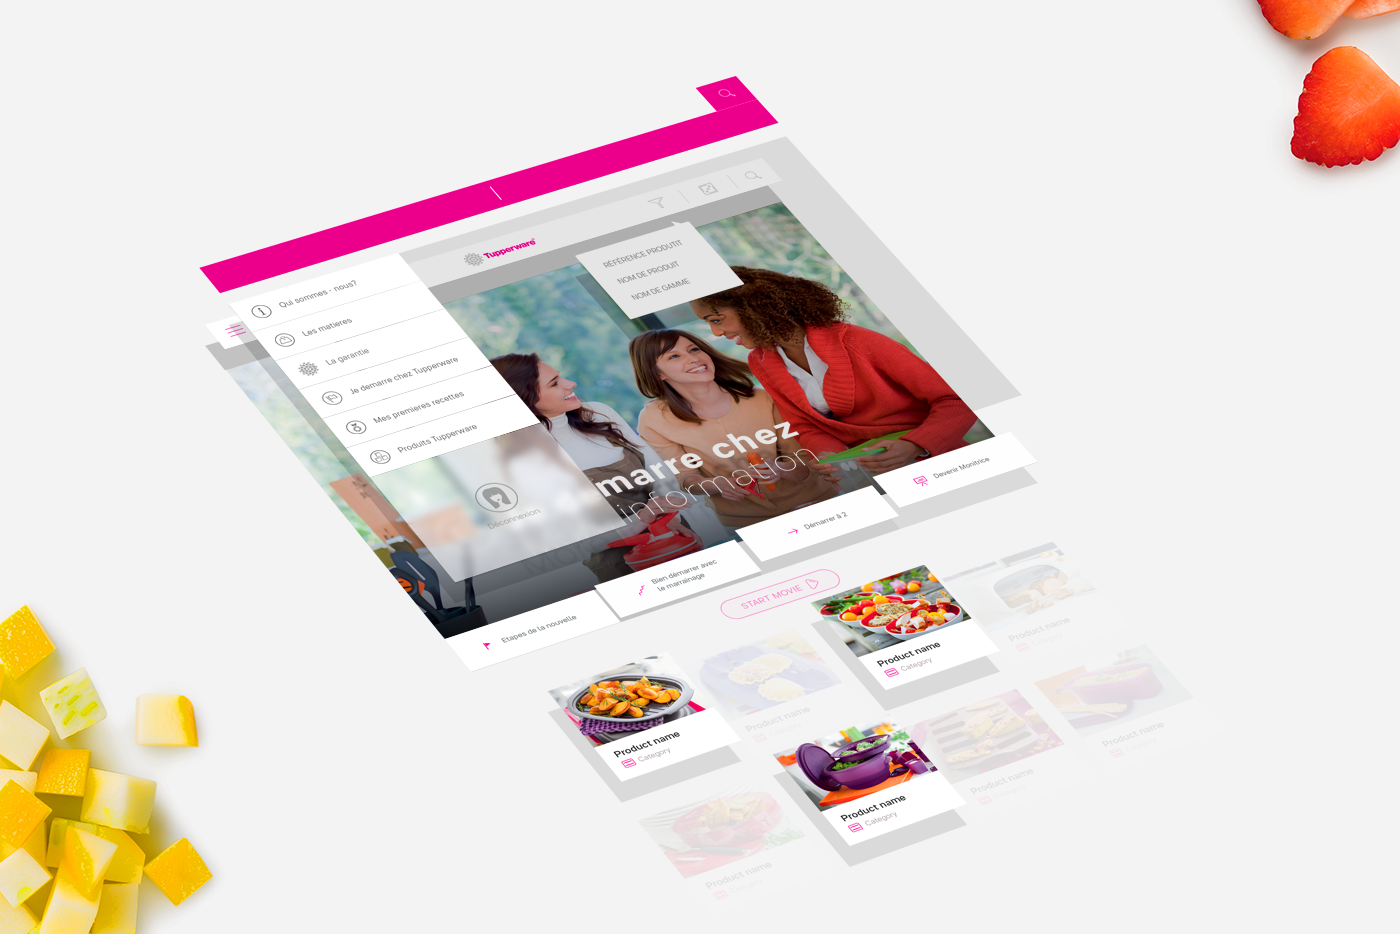 tupperware RR Donnelley iPad application UI dishes motion Web minimal clean flat interactive design healthy food ux france